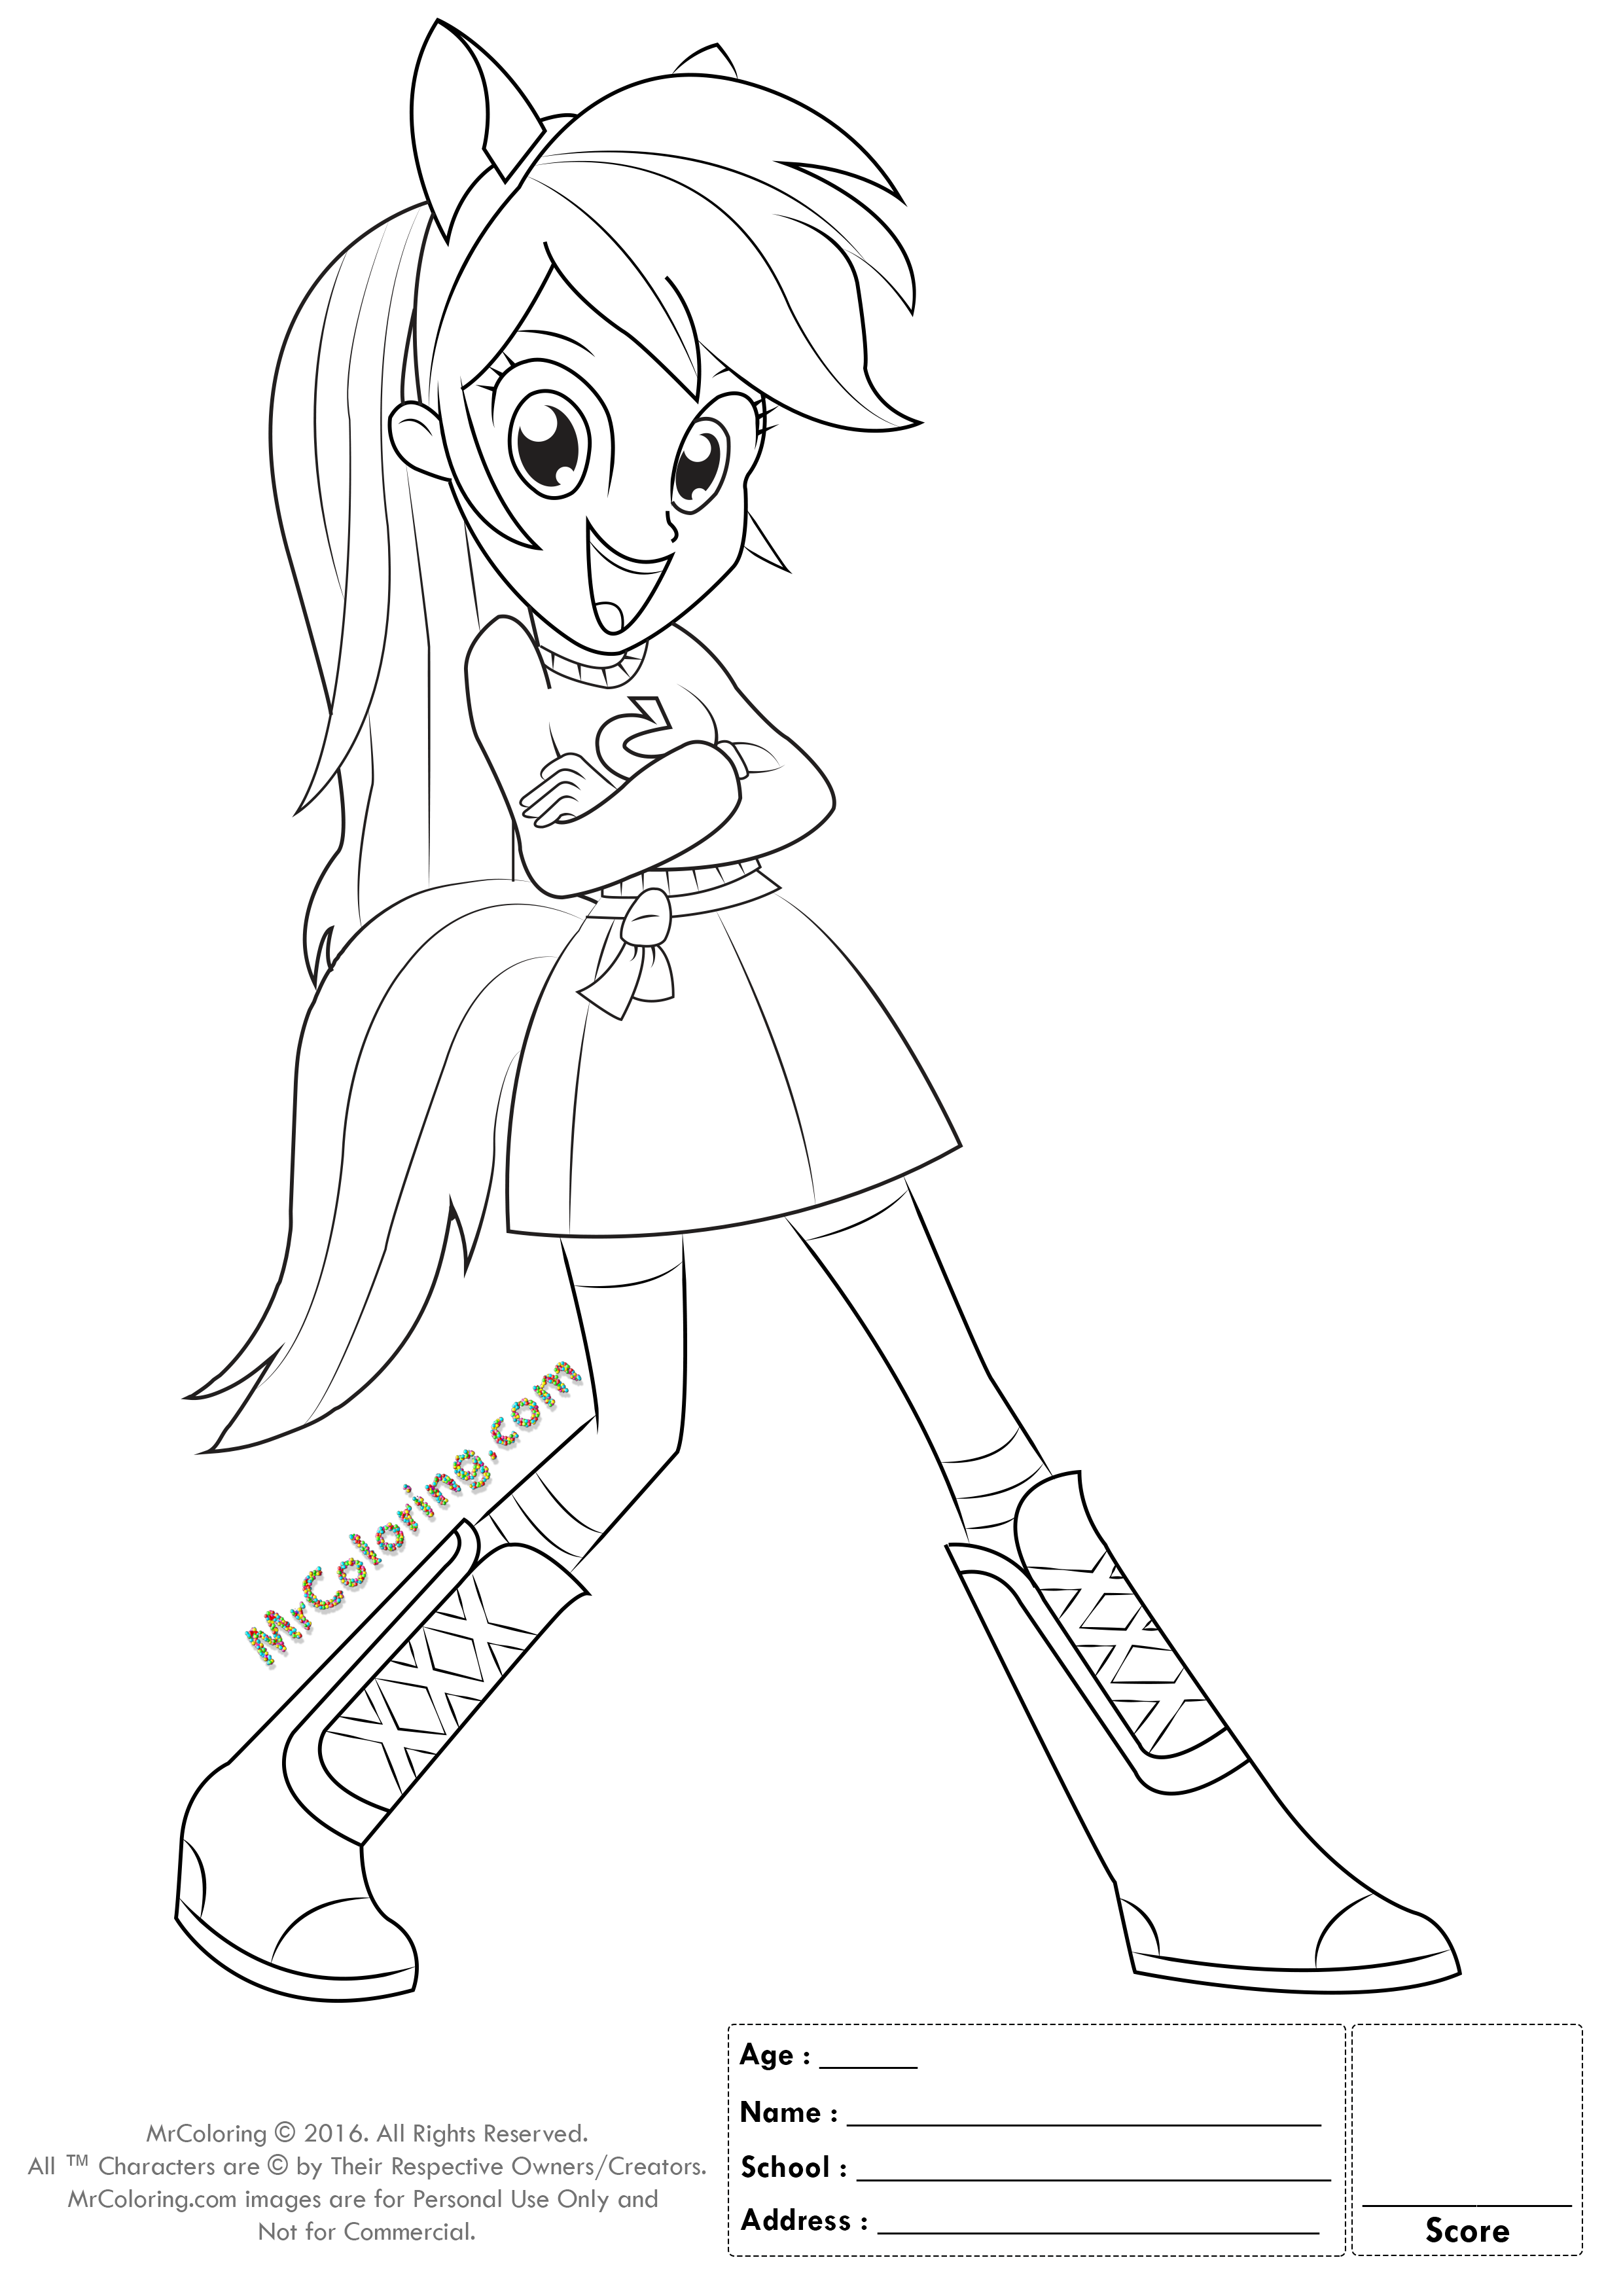 MLP Rainbow Dash Equestria Girls Coloring Pages - 3 | MrColoring.com